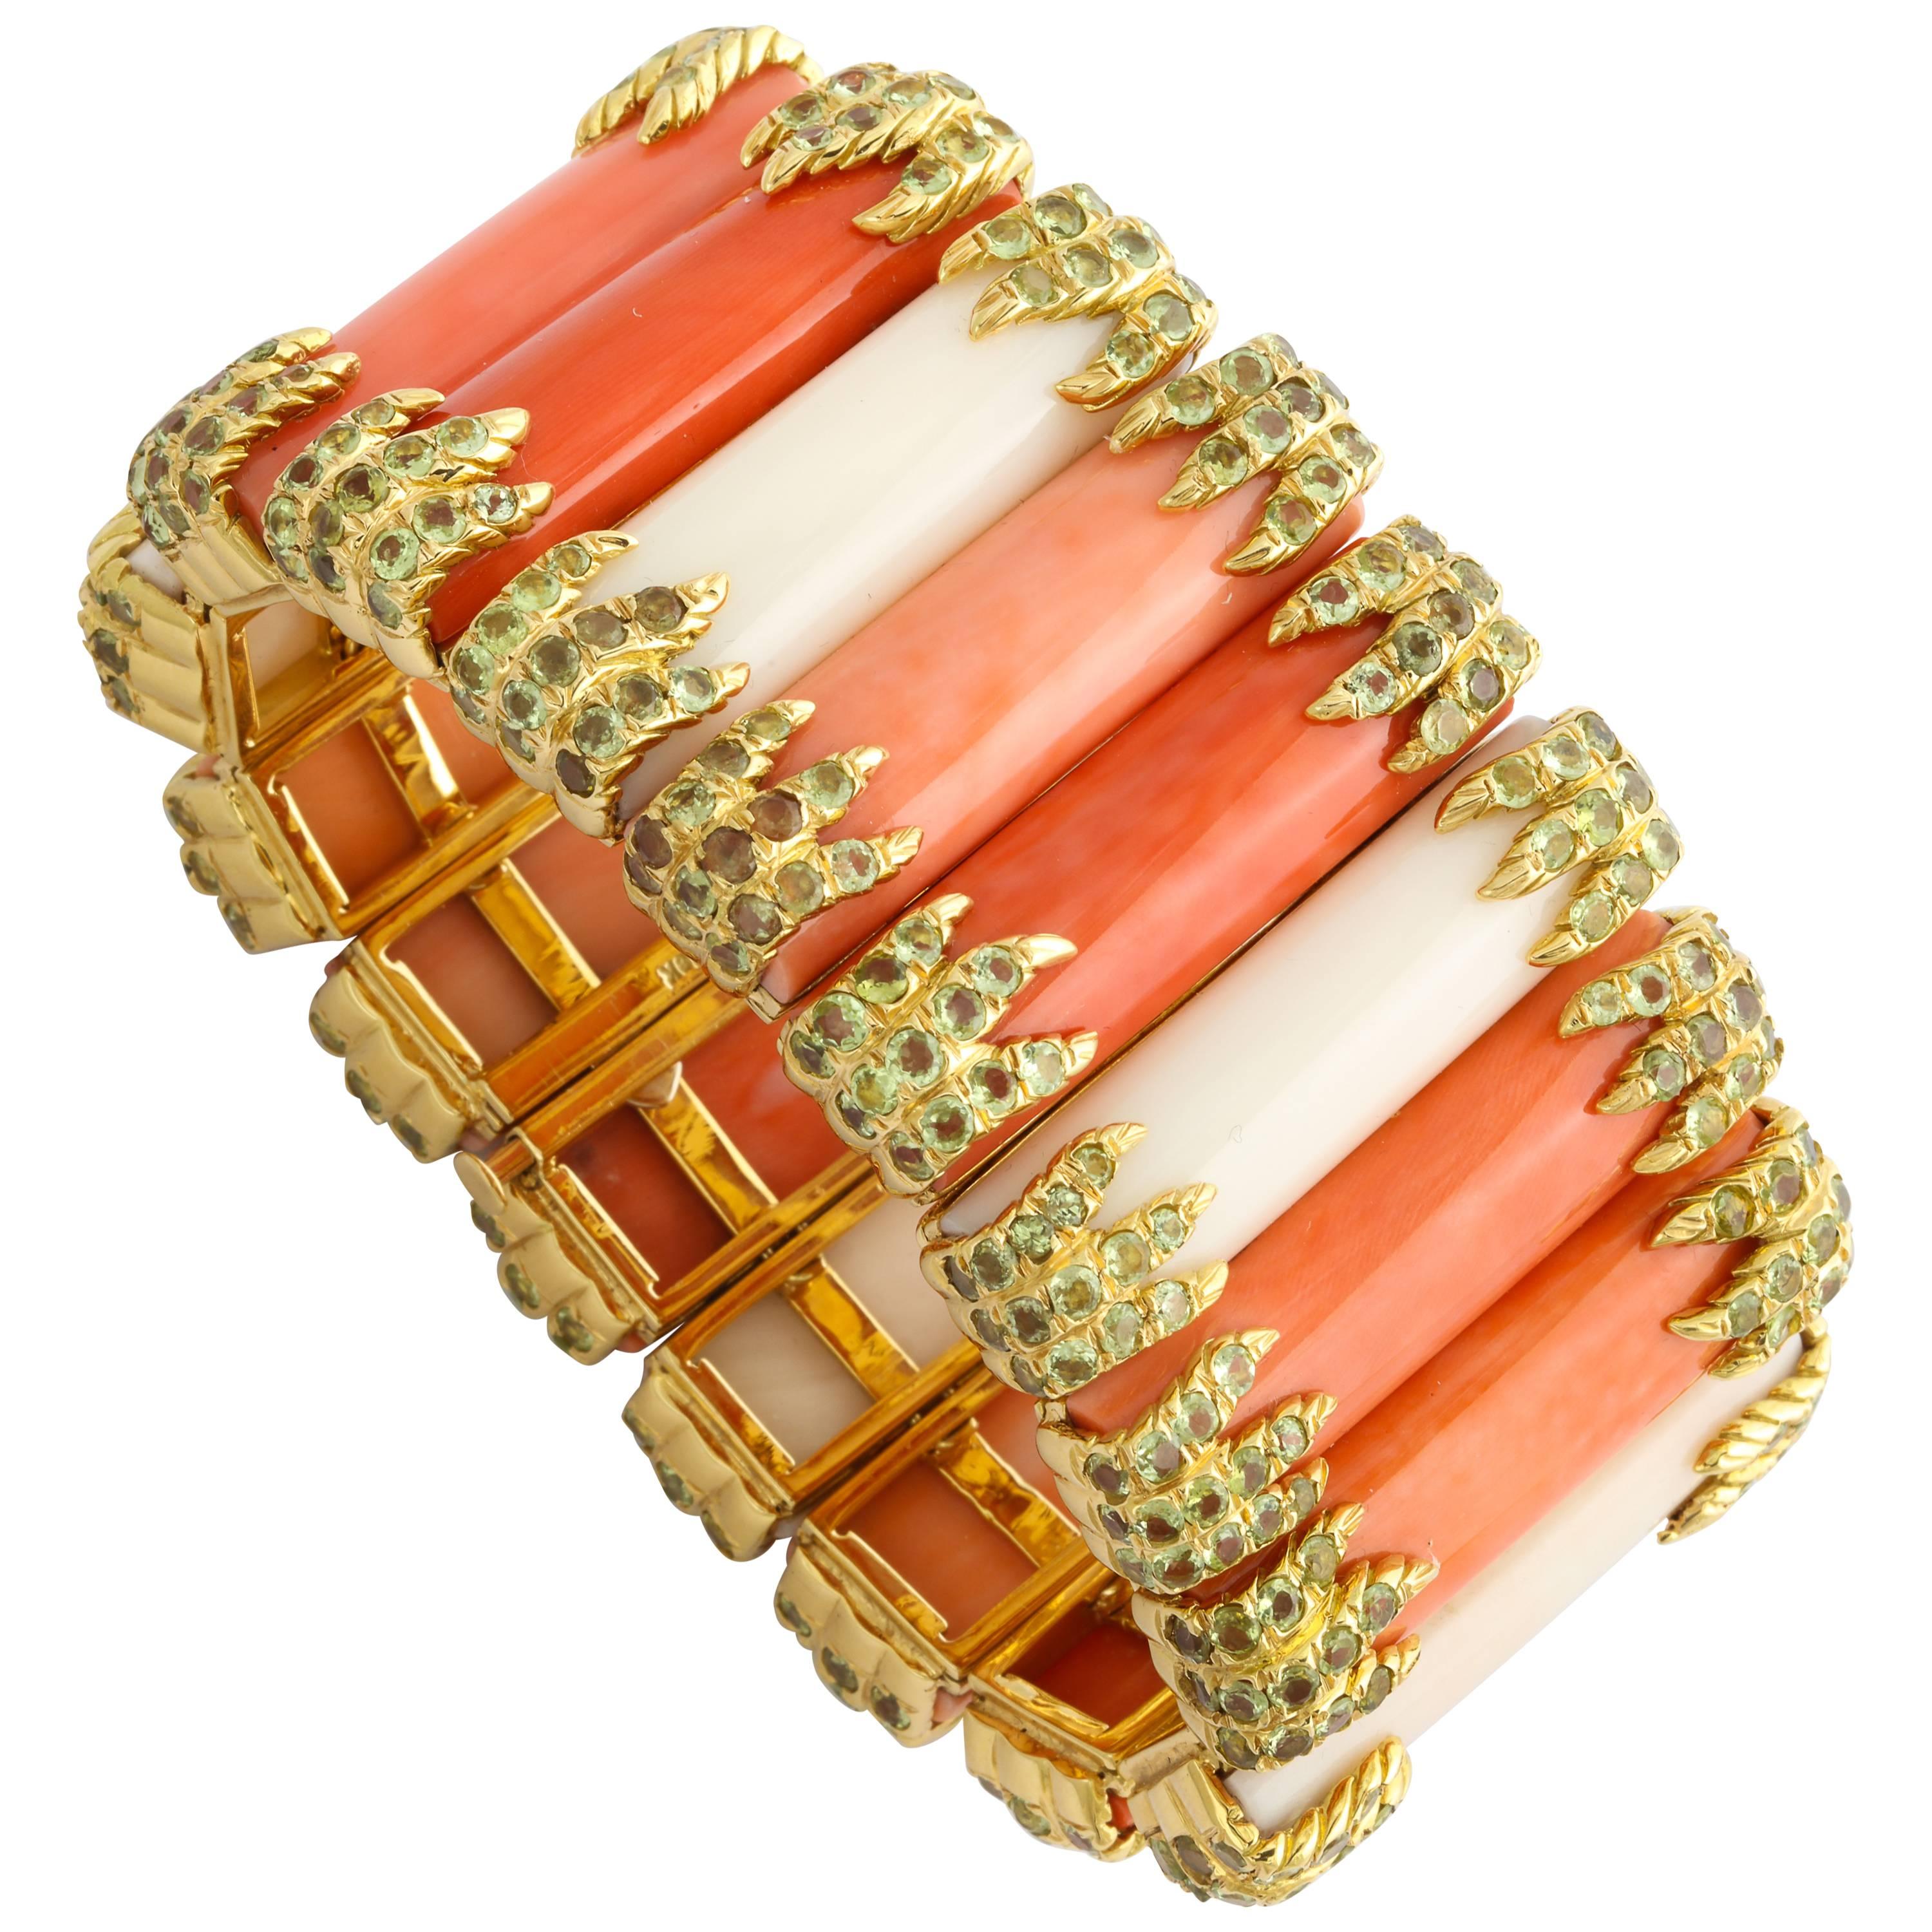 A beautiful and important one-of-a-kind Tony Duquette bracelet of 18K gold links holding long rounded sections of natural gem coral in various colors including: momo (salmon color from Sardinia); angel skin; and white, each section secured with 